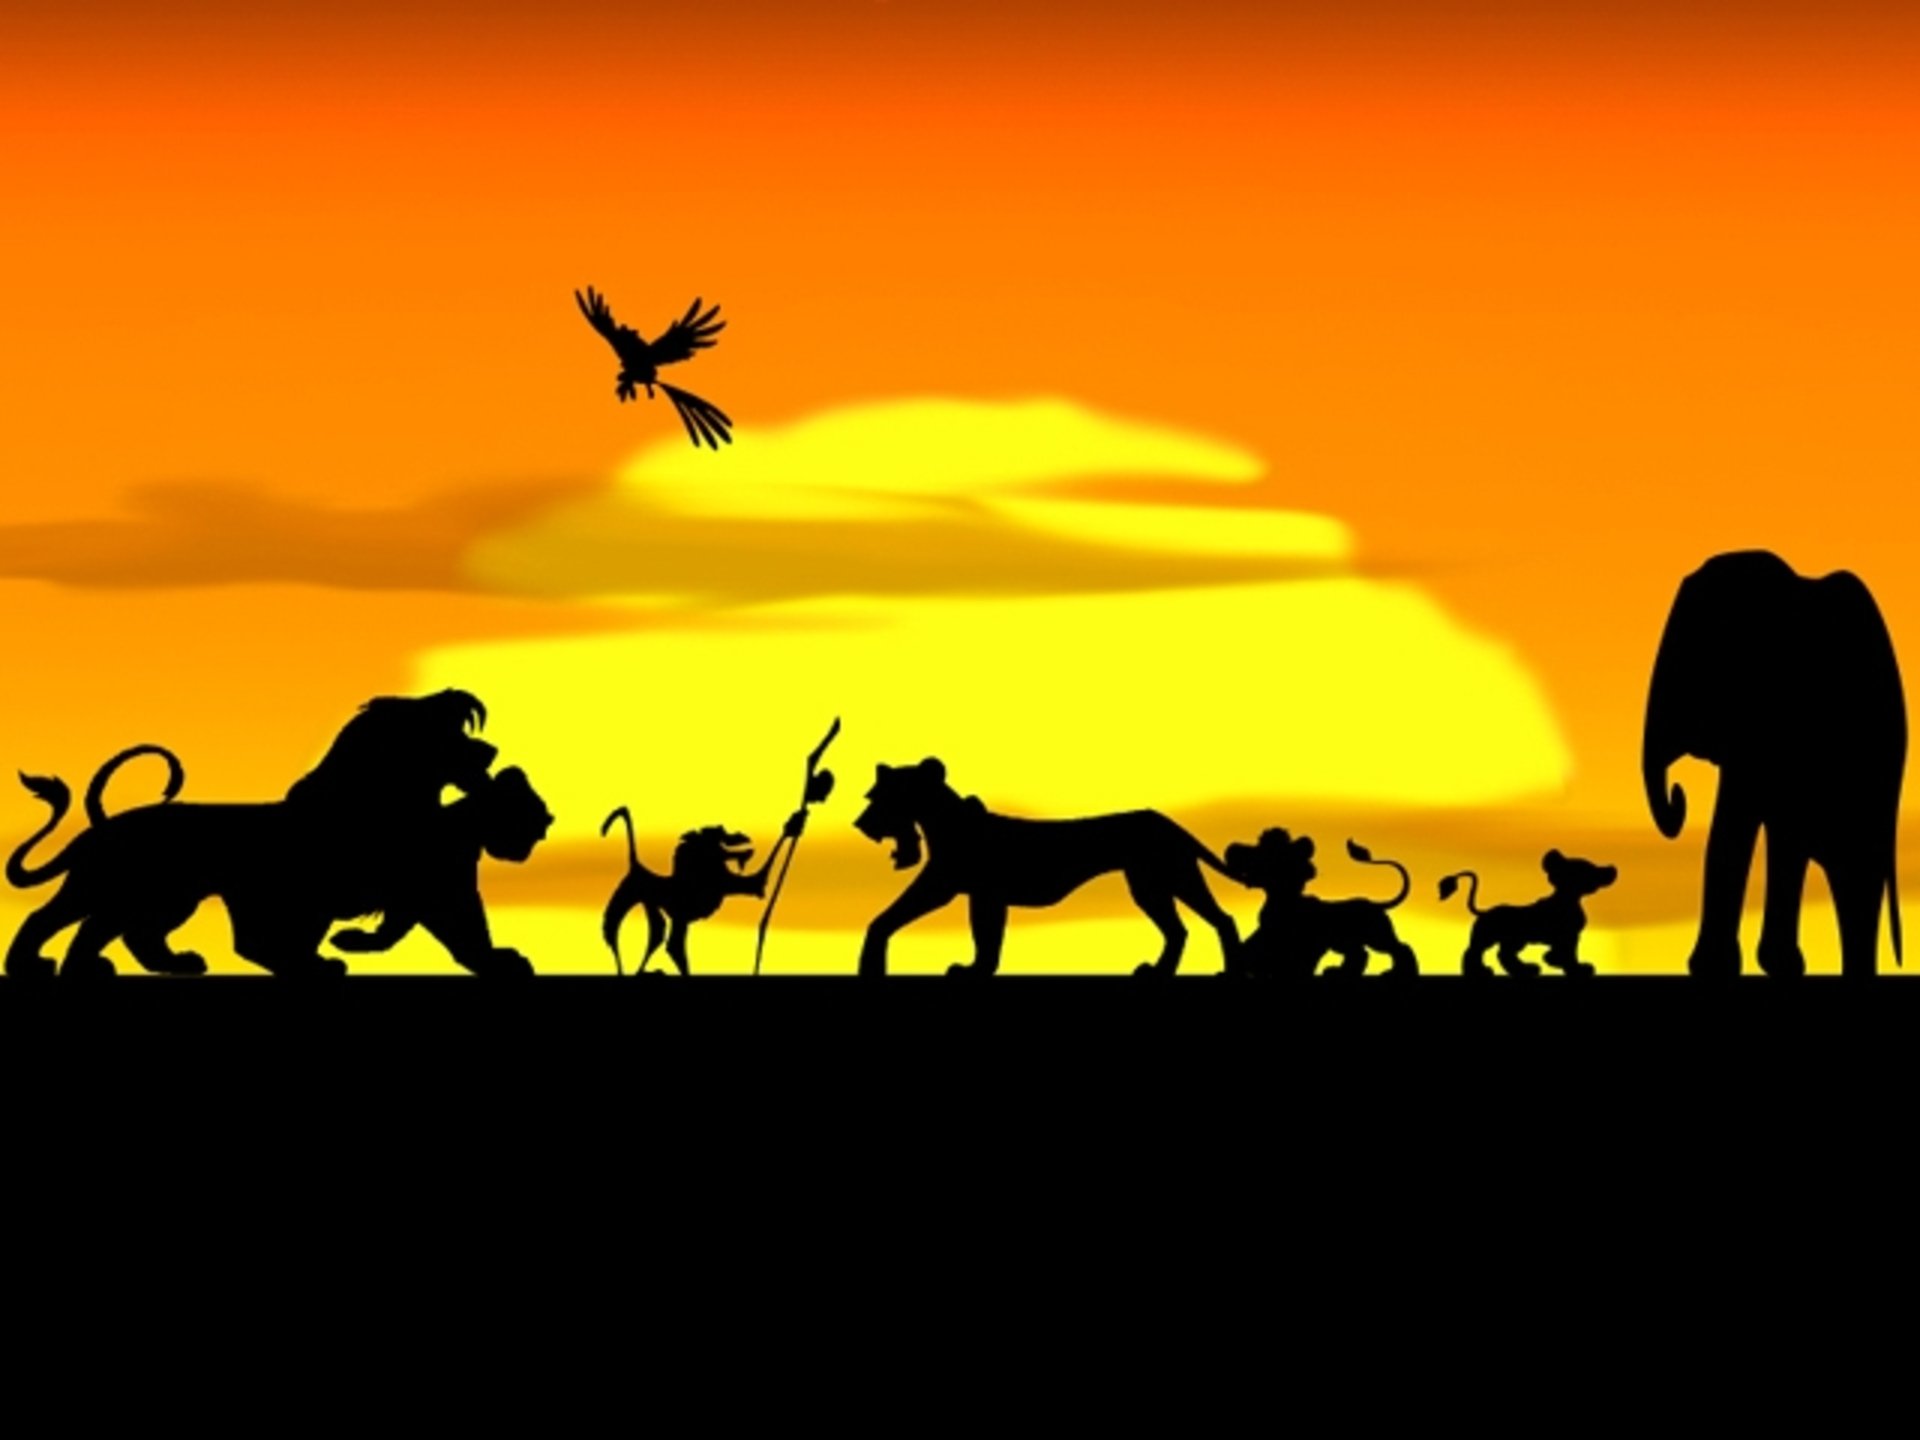 The Lion King for mac download free